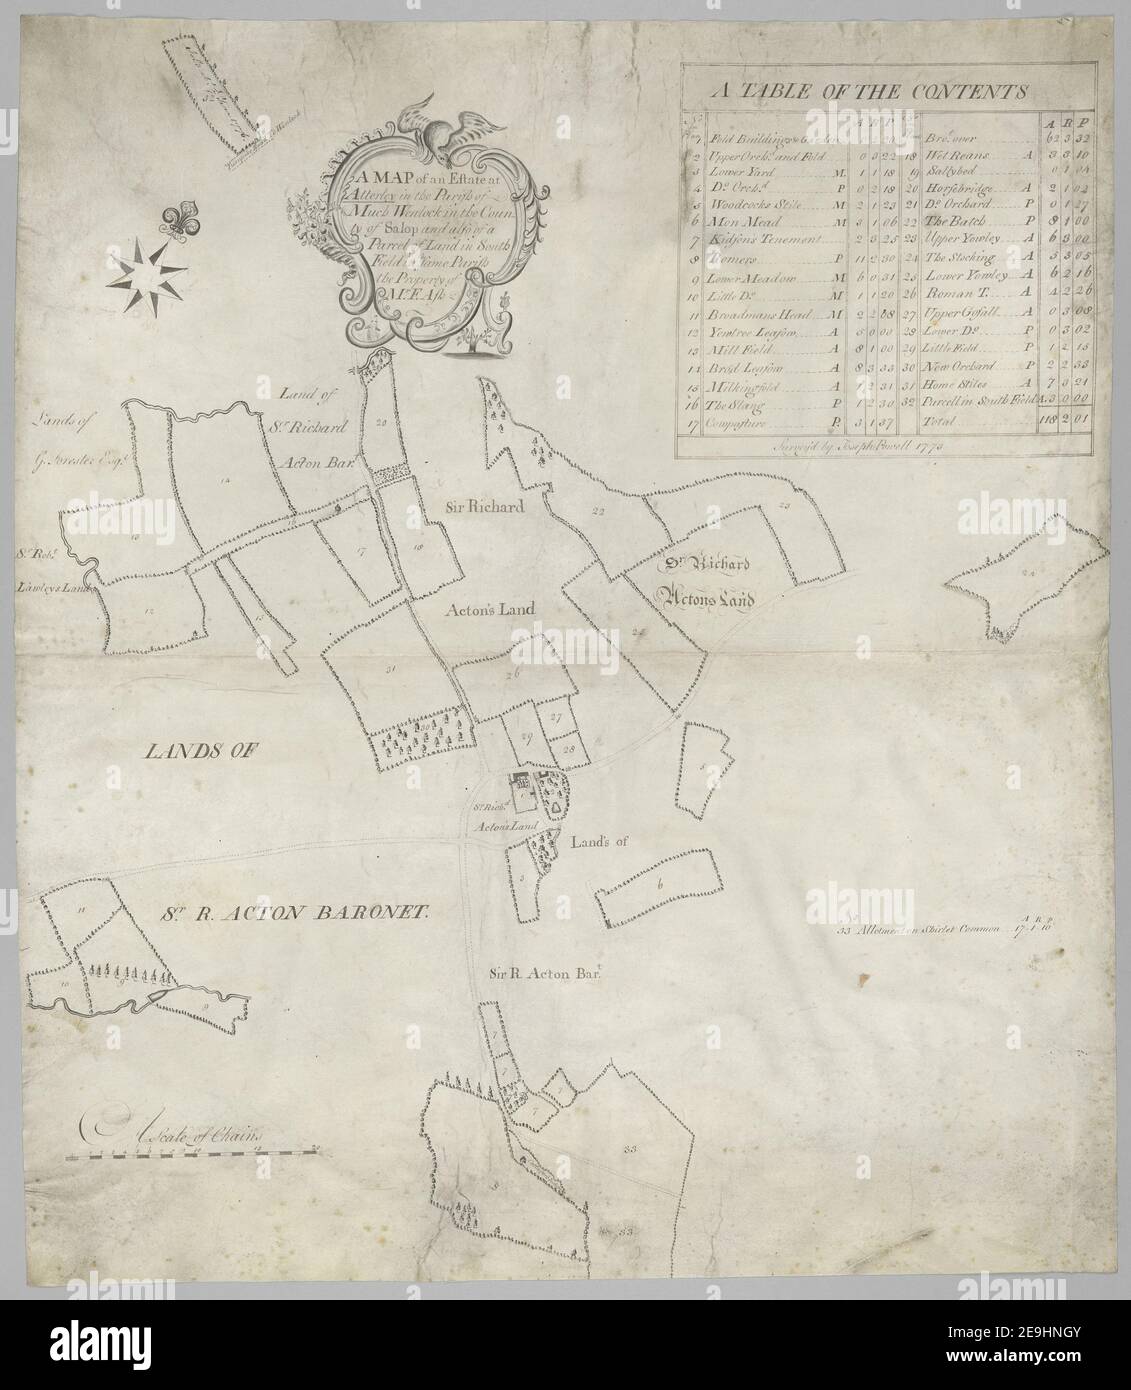 A map of an estate at Atterley in the parish of Much Wenlock, in the county of Salop, and also of a parcel of land in South Field, in the same parish, the property of Mr. F. Ash  Author  Powell, Joseph 36.23. Place of publication: [Much Wenlock] Publisher: Joseph Powell, Date of publication: 1773.  Item type: 1 map Medium: pen and ink drawing on vellum Dimensions: 66 x 57 cm  Former owner: George III, King of Great Britain, 1738-1820 Stock Photo